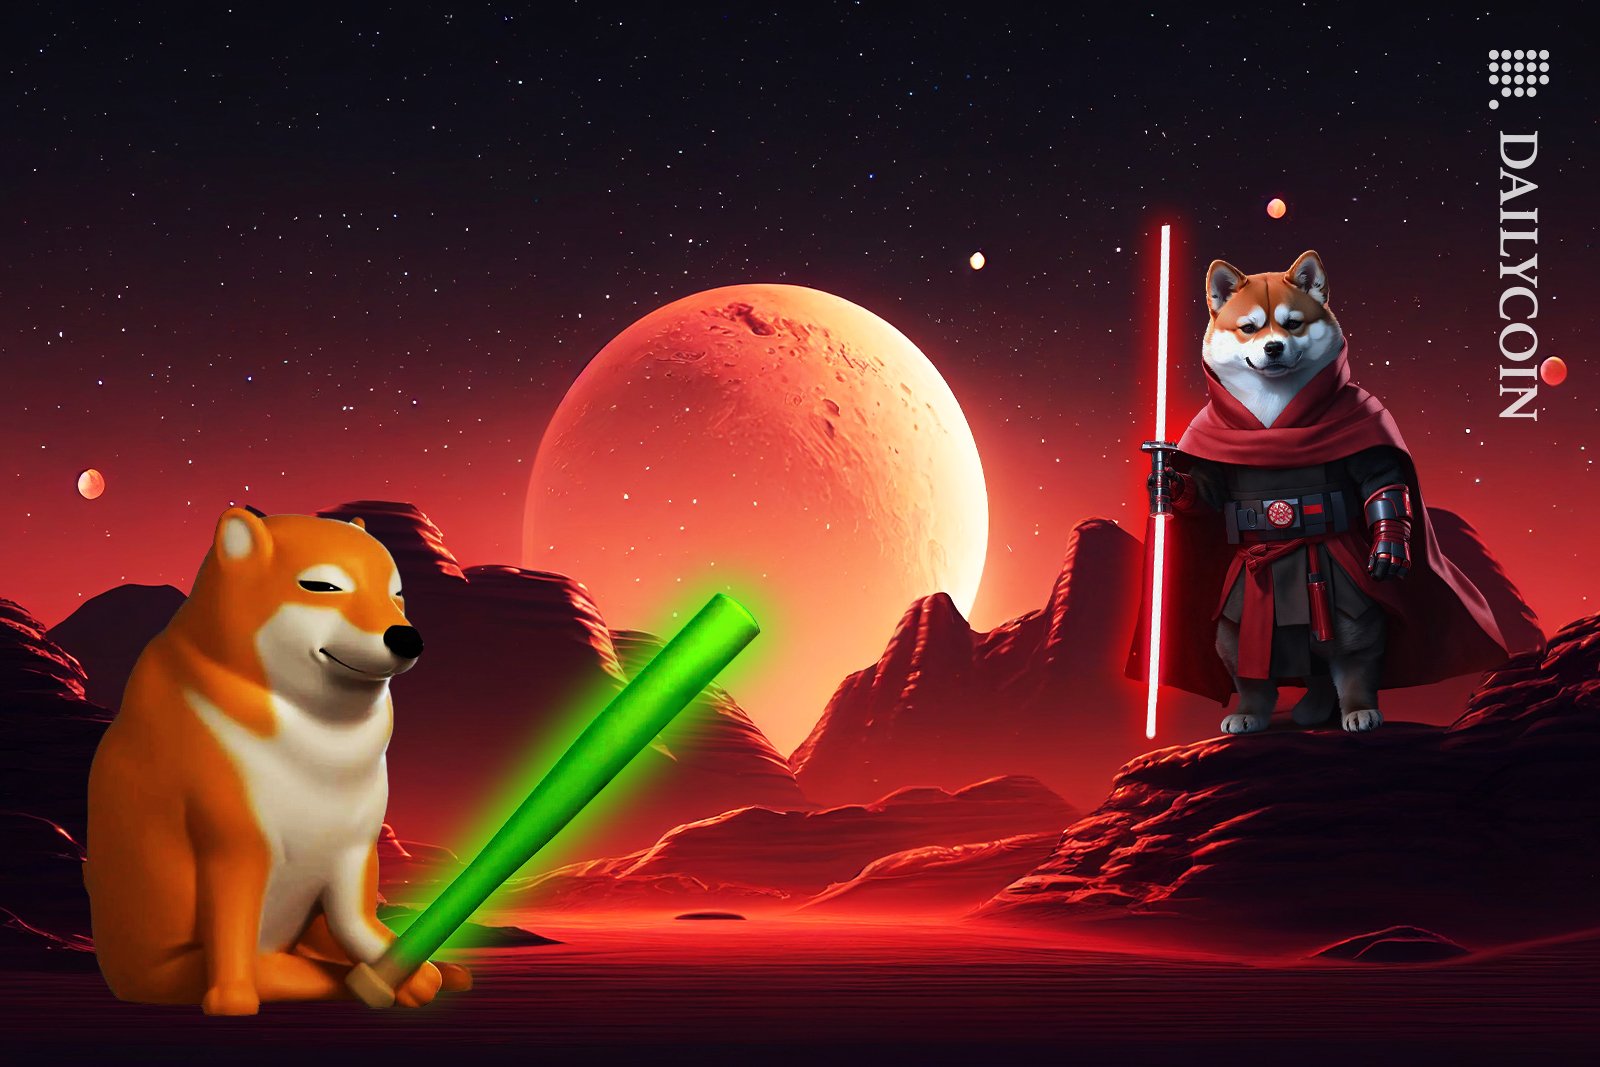 Shiba inu with a lightsaber and Bonk is waiting for him with a baseball bat lightsaber.